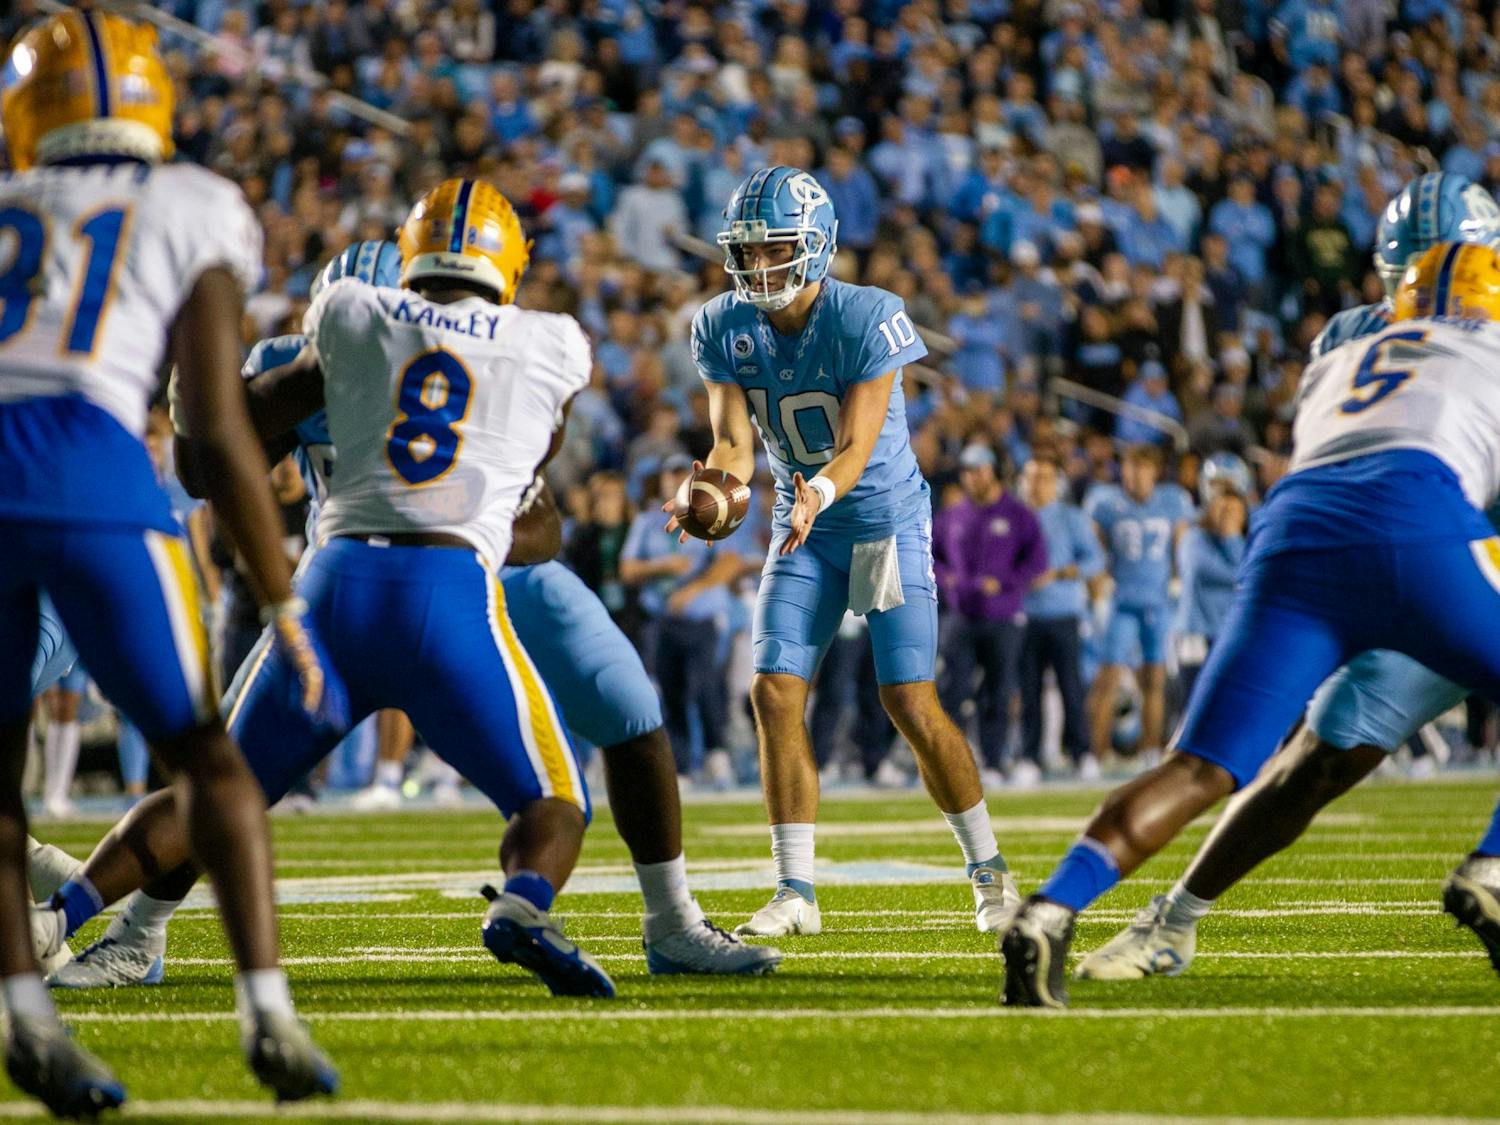 UNC redshirt first-year quarterback Drake Maye (10) catches the snap at the homecoming football game against Pitt on Oct. 19, 2022 at Kenan Stadium. UNC beat Pitt 42-24.